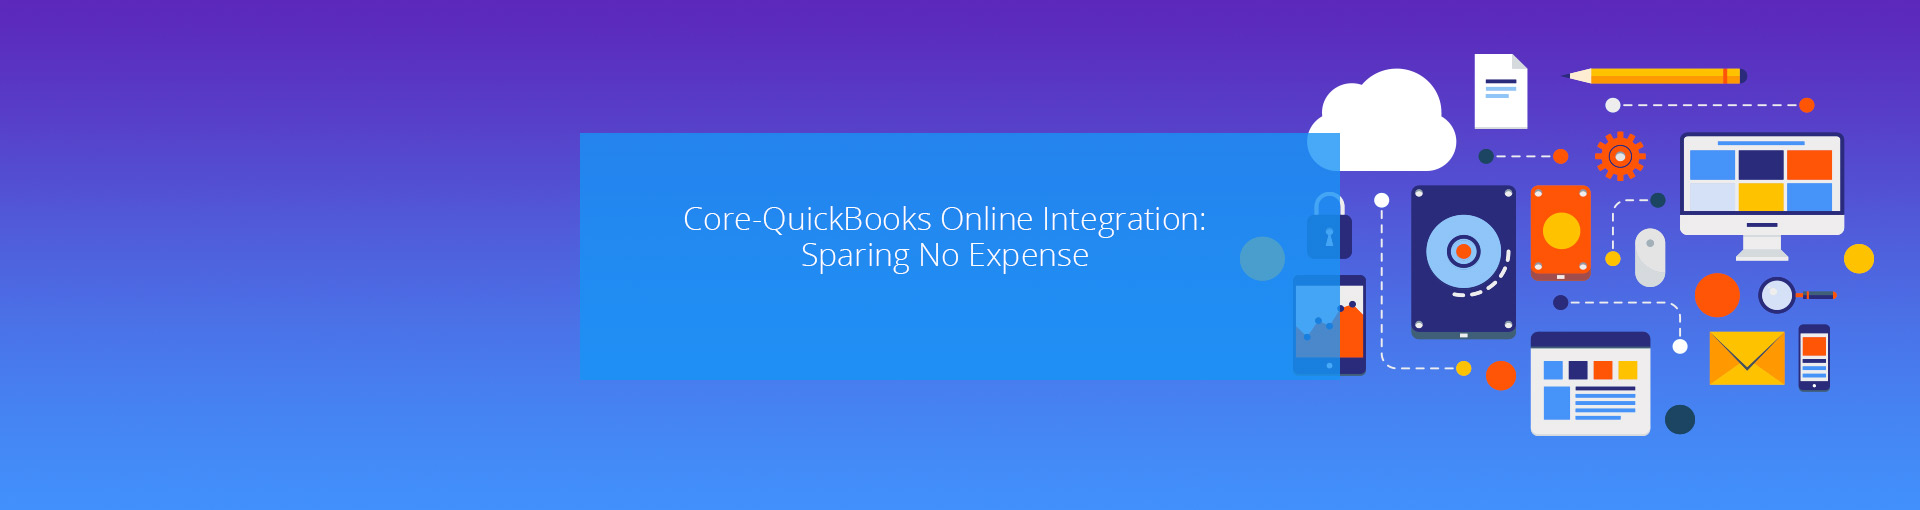 CORE-QuickBooks Online Integration: Sparing No Expense Featured Image